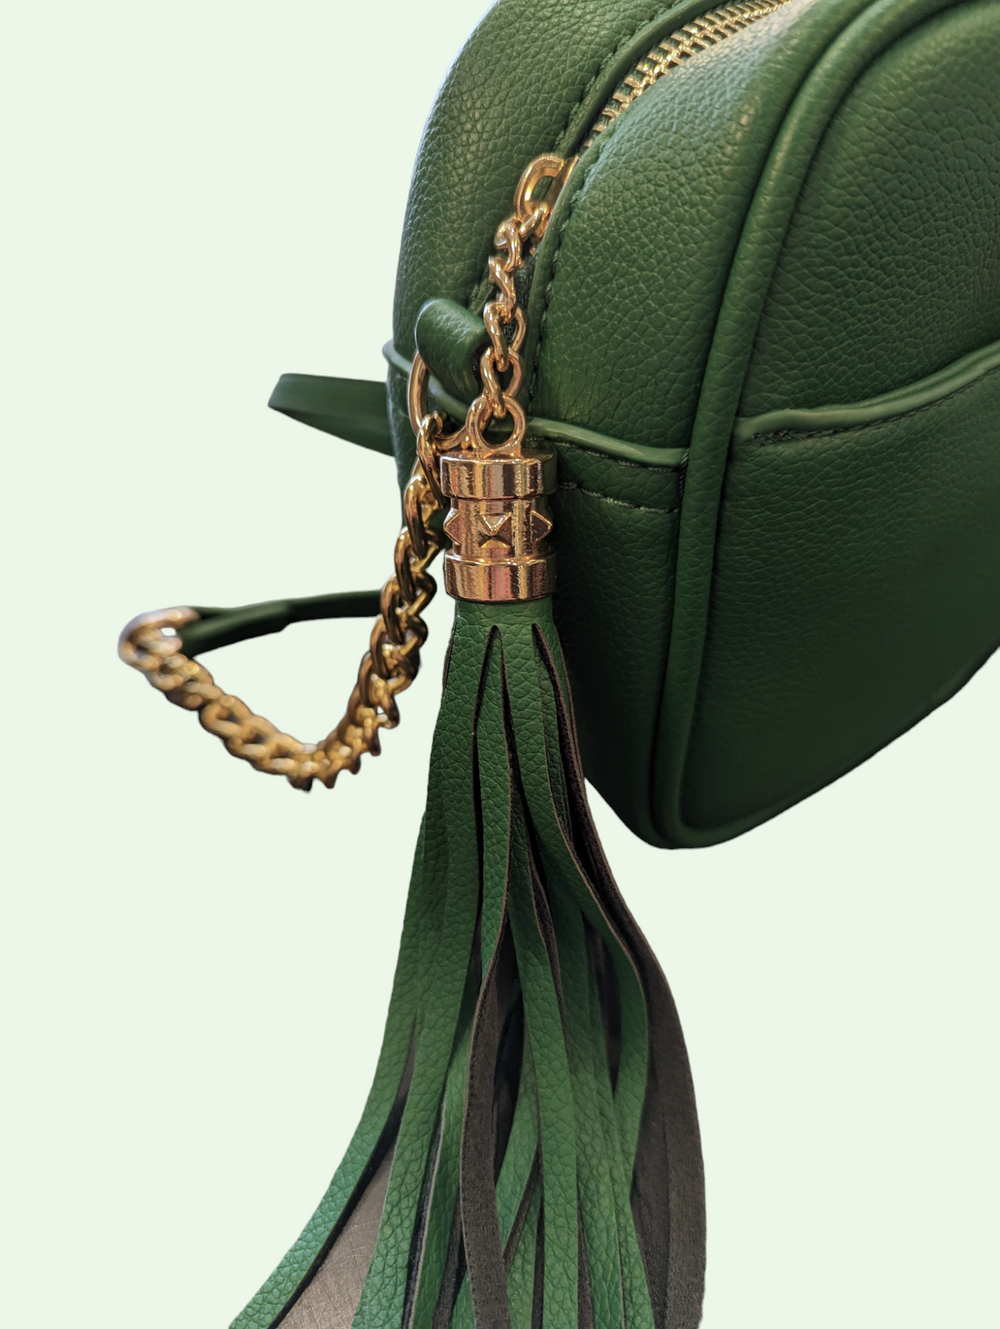 a close up of the tassel on the crossbody bag